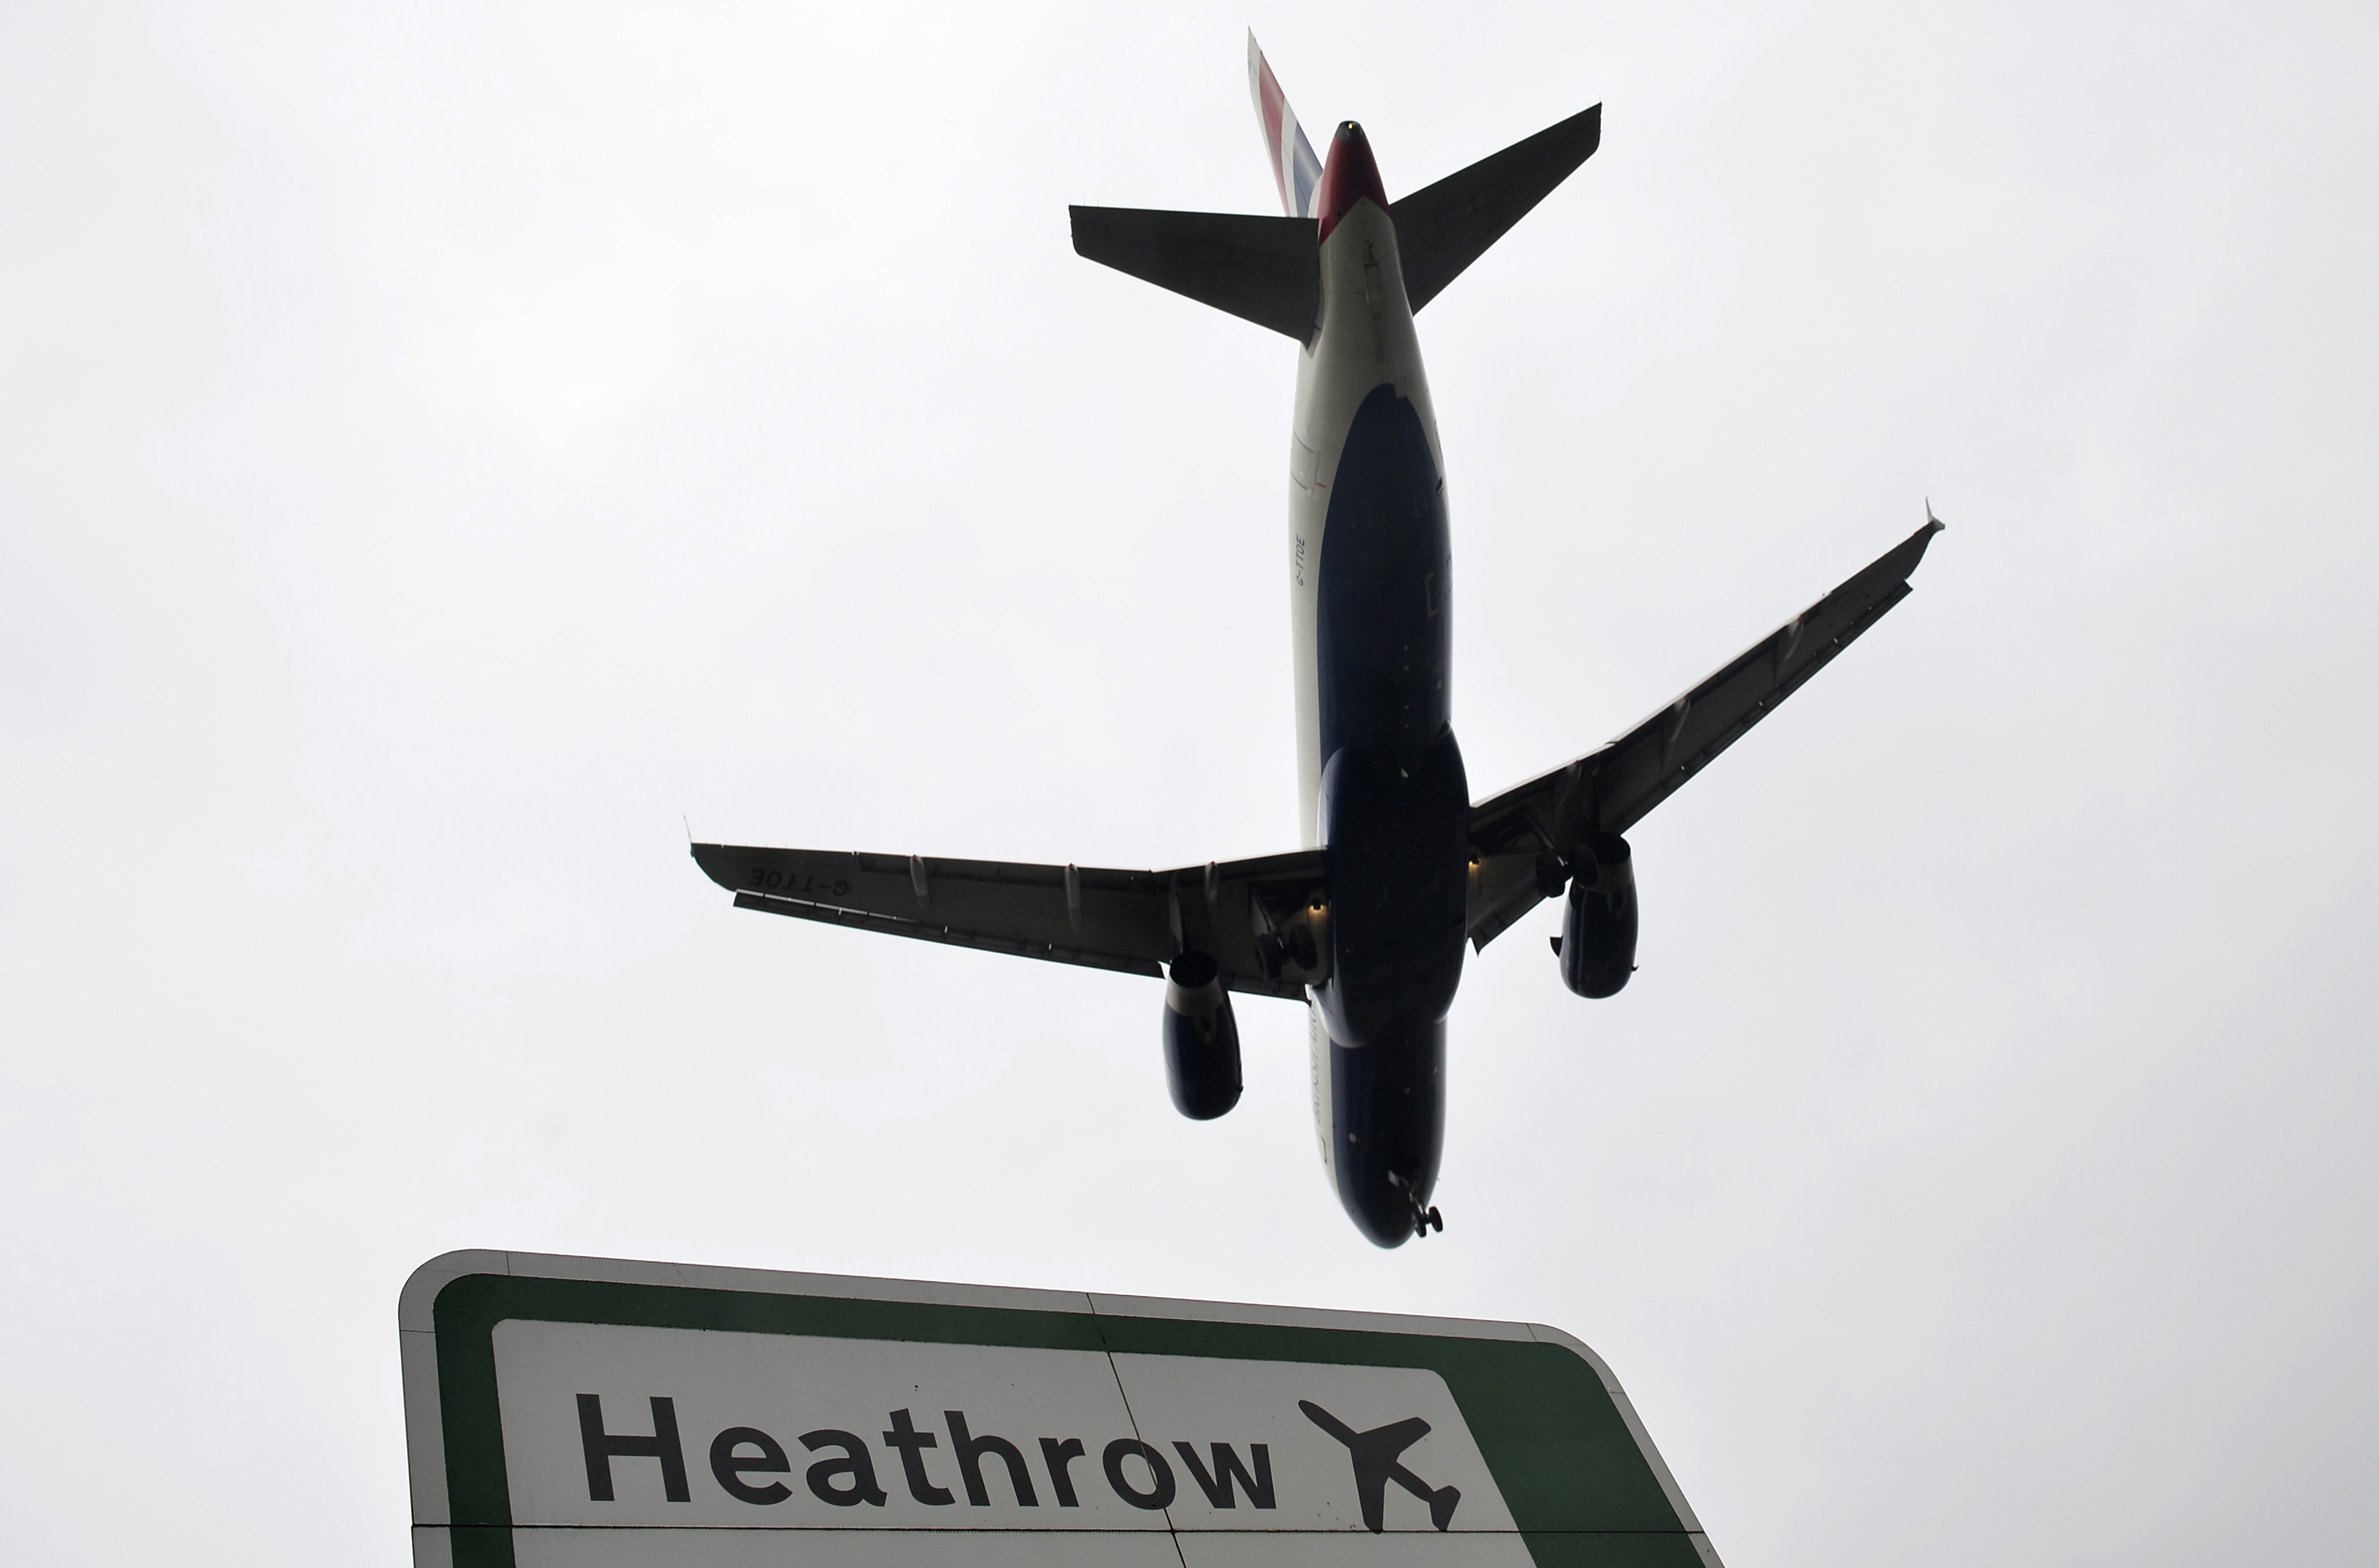 epa07269871 (FILE) A British Airways airplane landing at Heathrow airport in London, Britain, 25 October 2016 (reissued 08 January 2019). Accoprding to reports, Europe's busiest airport Heathrow has suspended departures from its northern runway following reports of a drone sighting on 08 January 2019.  EPA/HANNAH MCKAY *** Local Caption *** 53332952